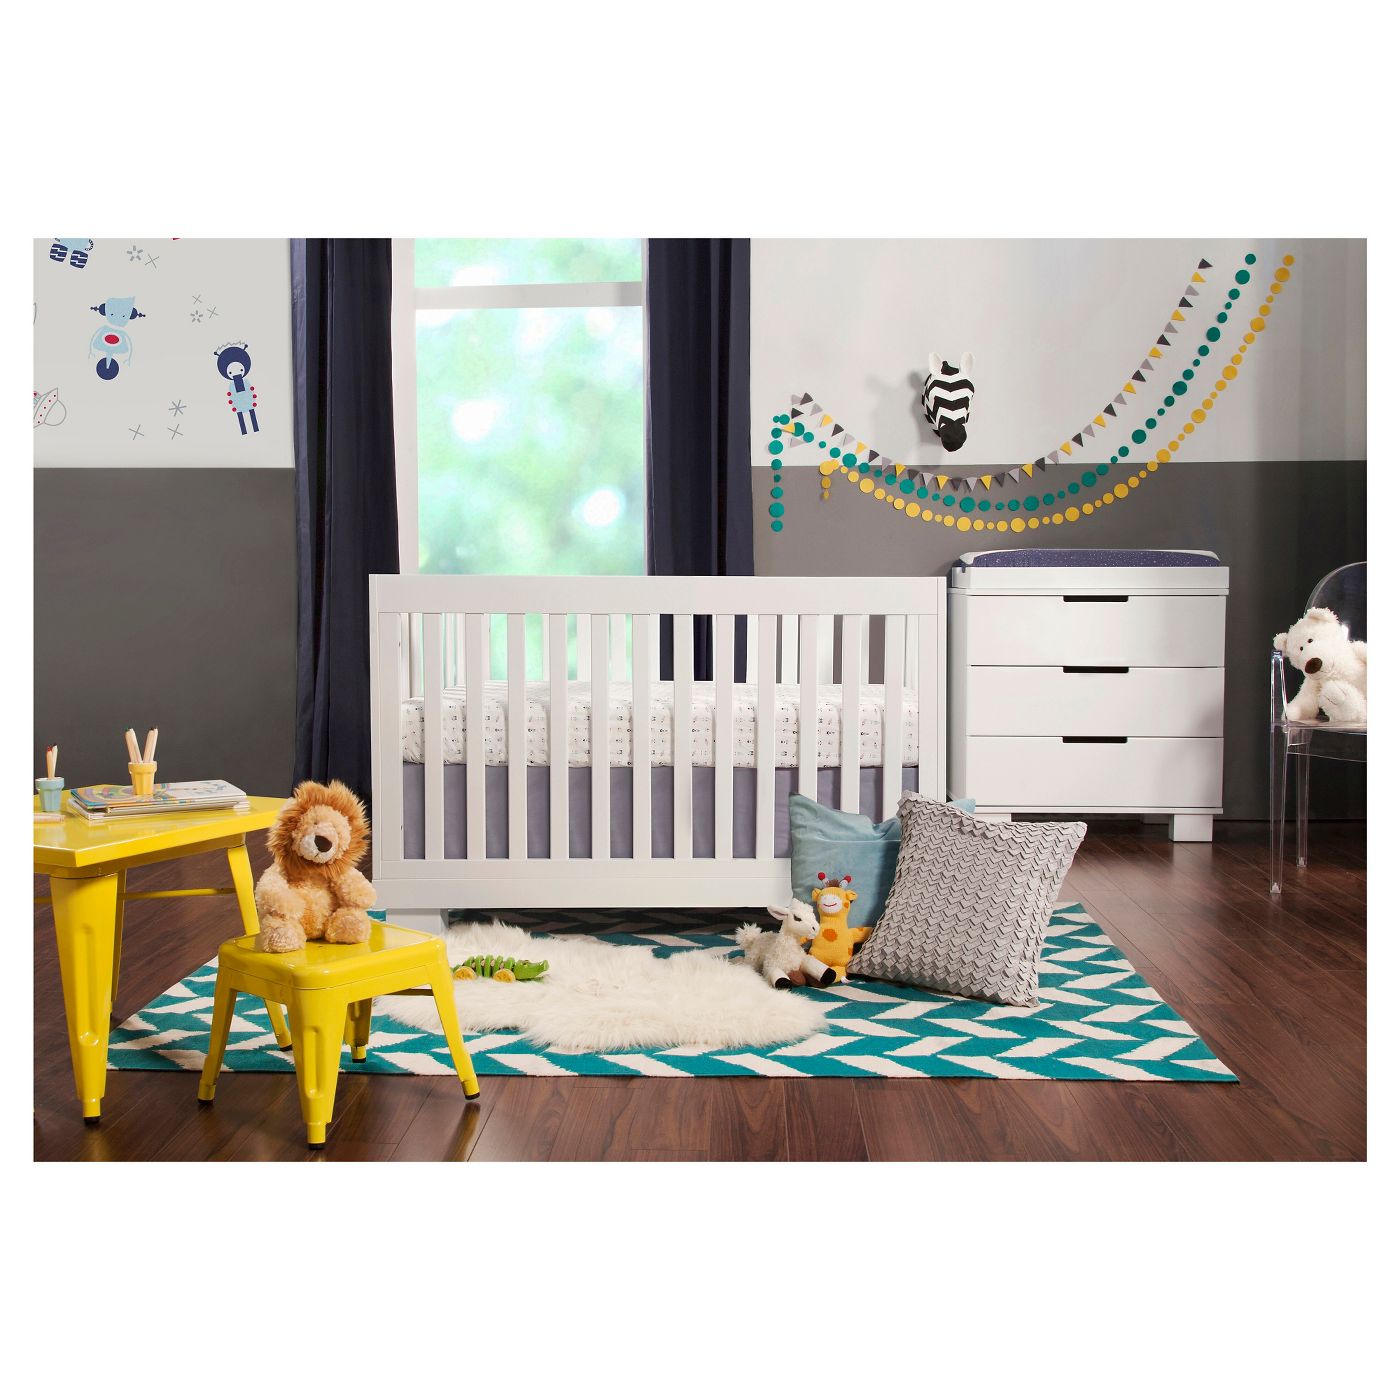 Babyletto Modo 3-in-1 Convertible Crib with Toddler Rail - image 7 of 7